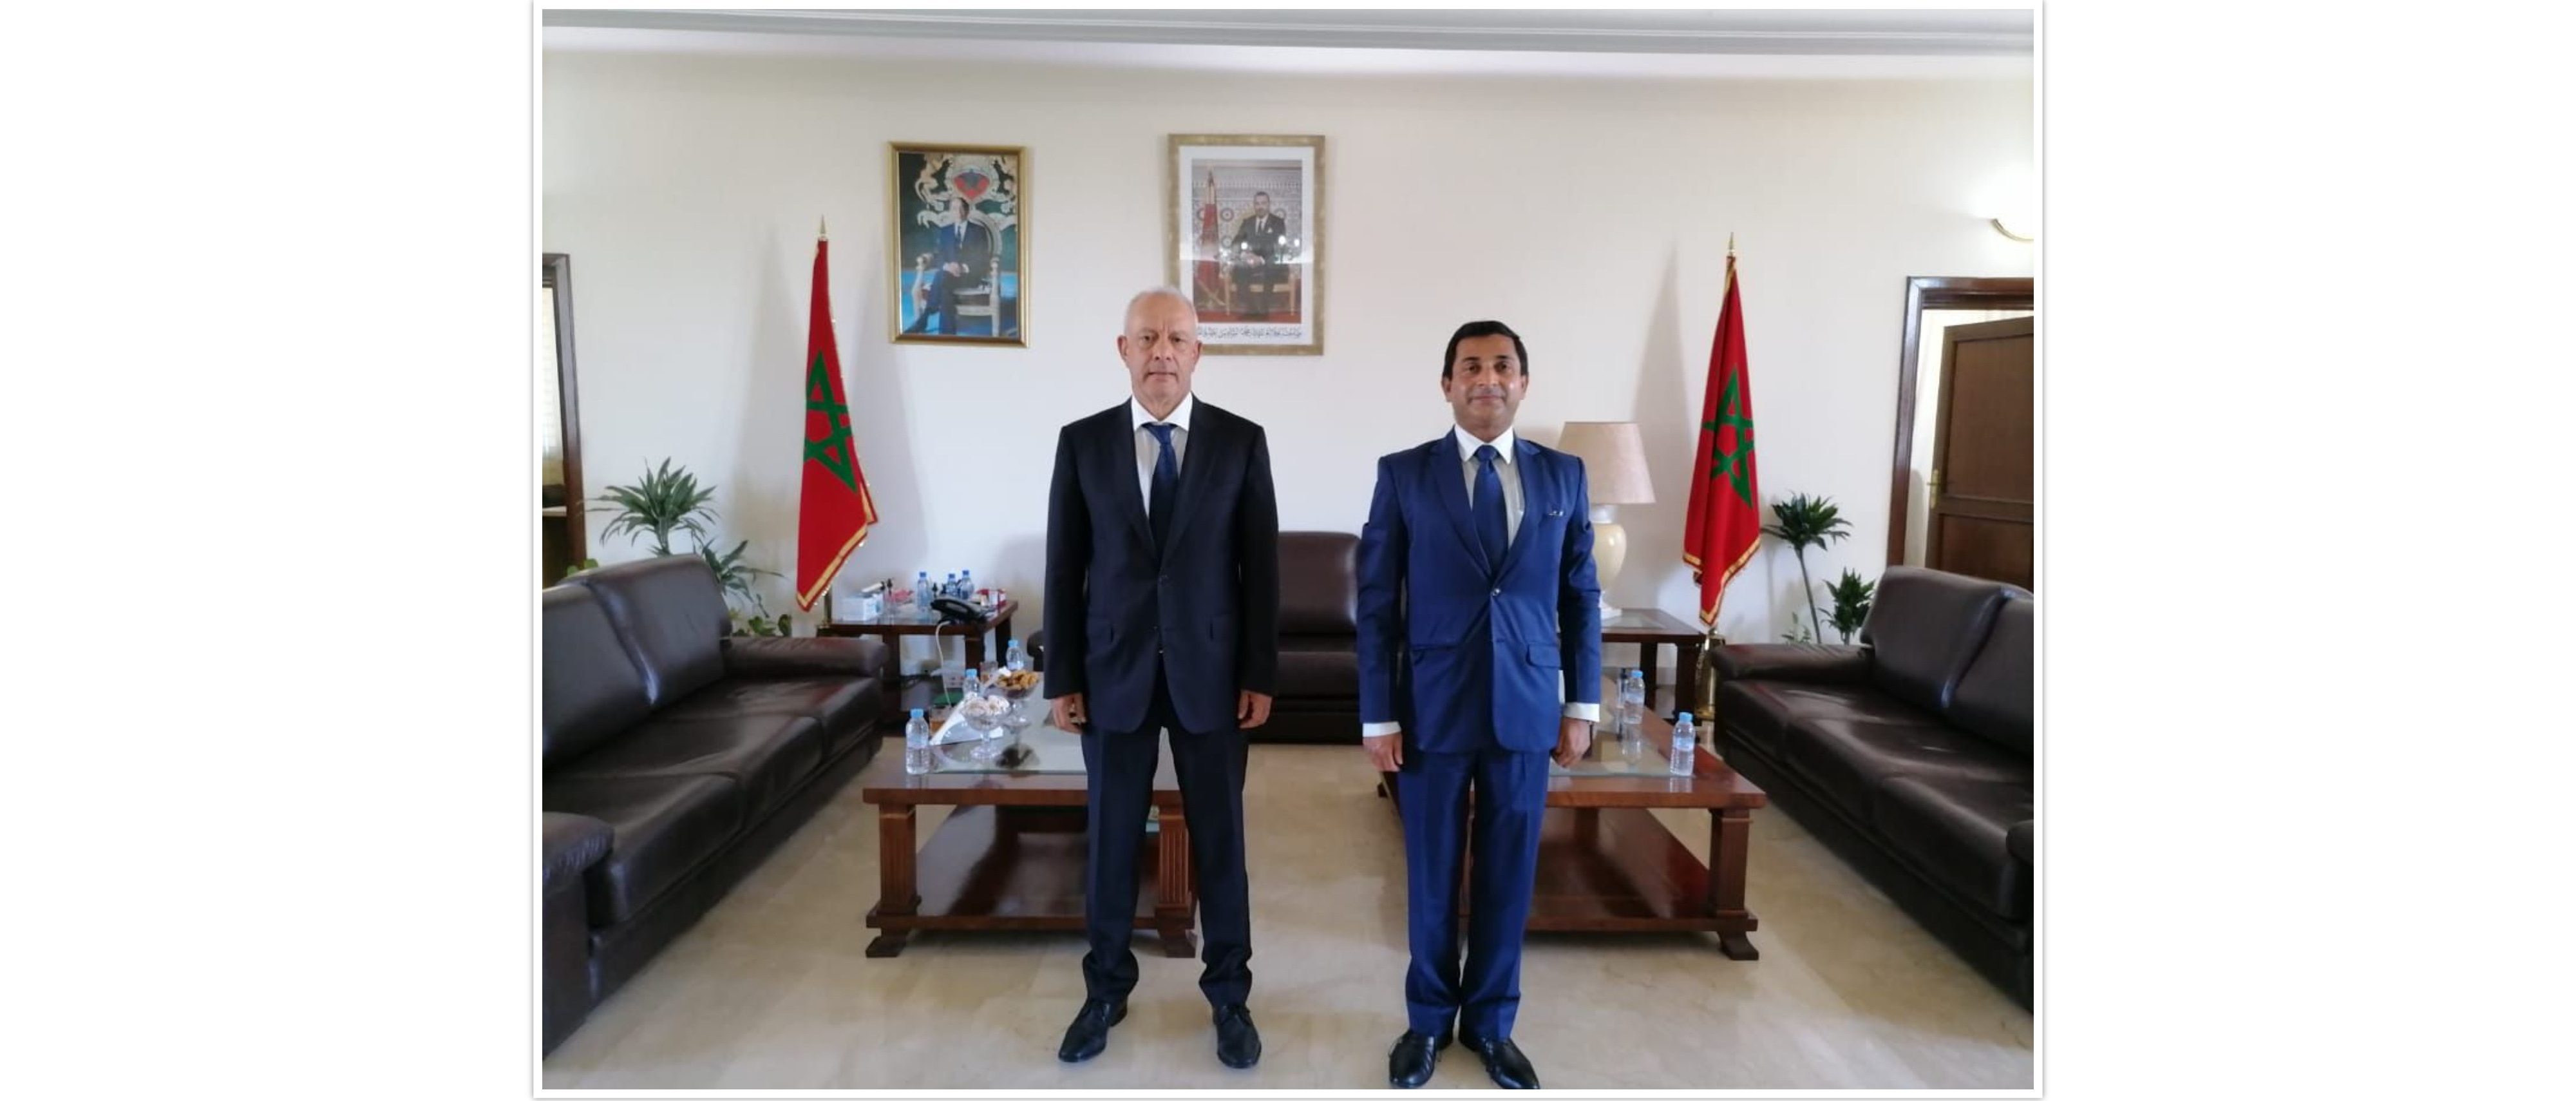  H.E. Ambassador Rajesh Vaishnaw meeting H.E. Mohamed Mhidia, Wali of the Tangier-Tetouan-Al Hoceima region and Governor of the Tangier-Assilah prefecture